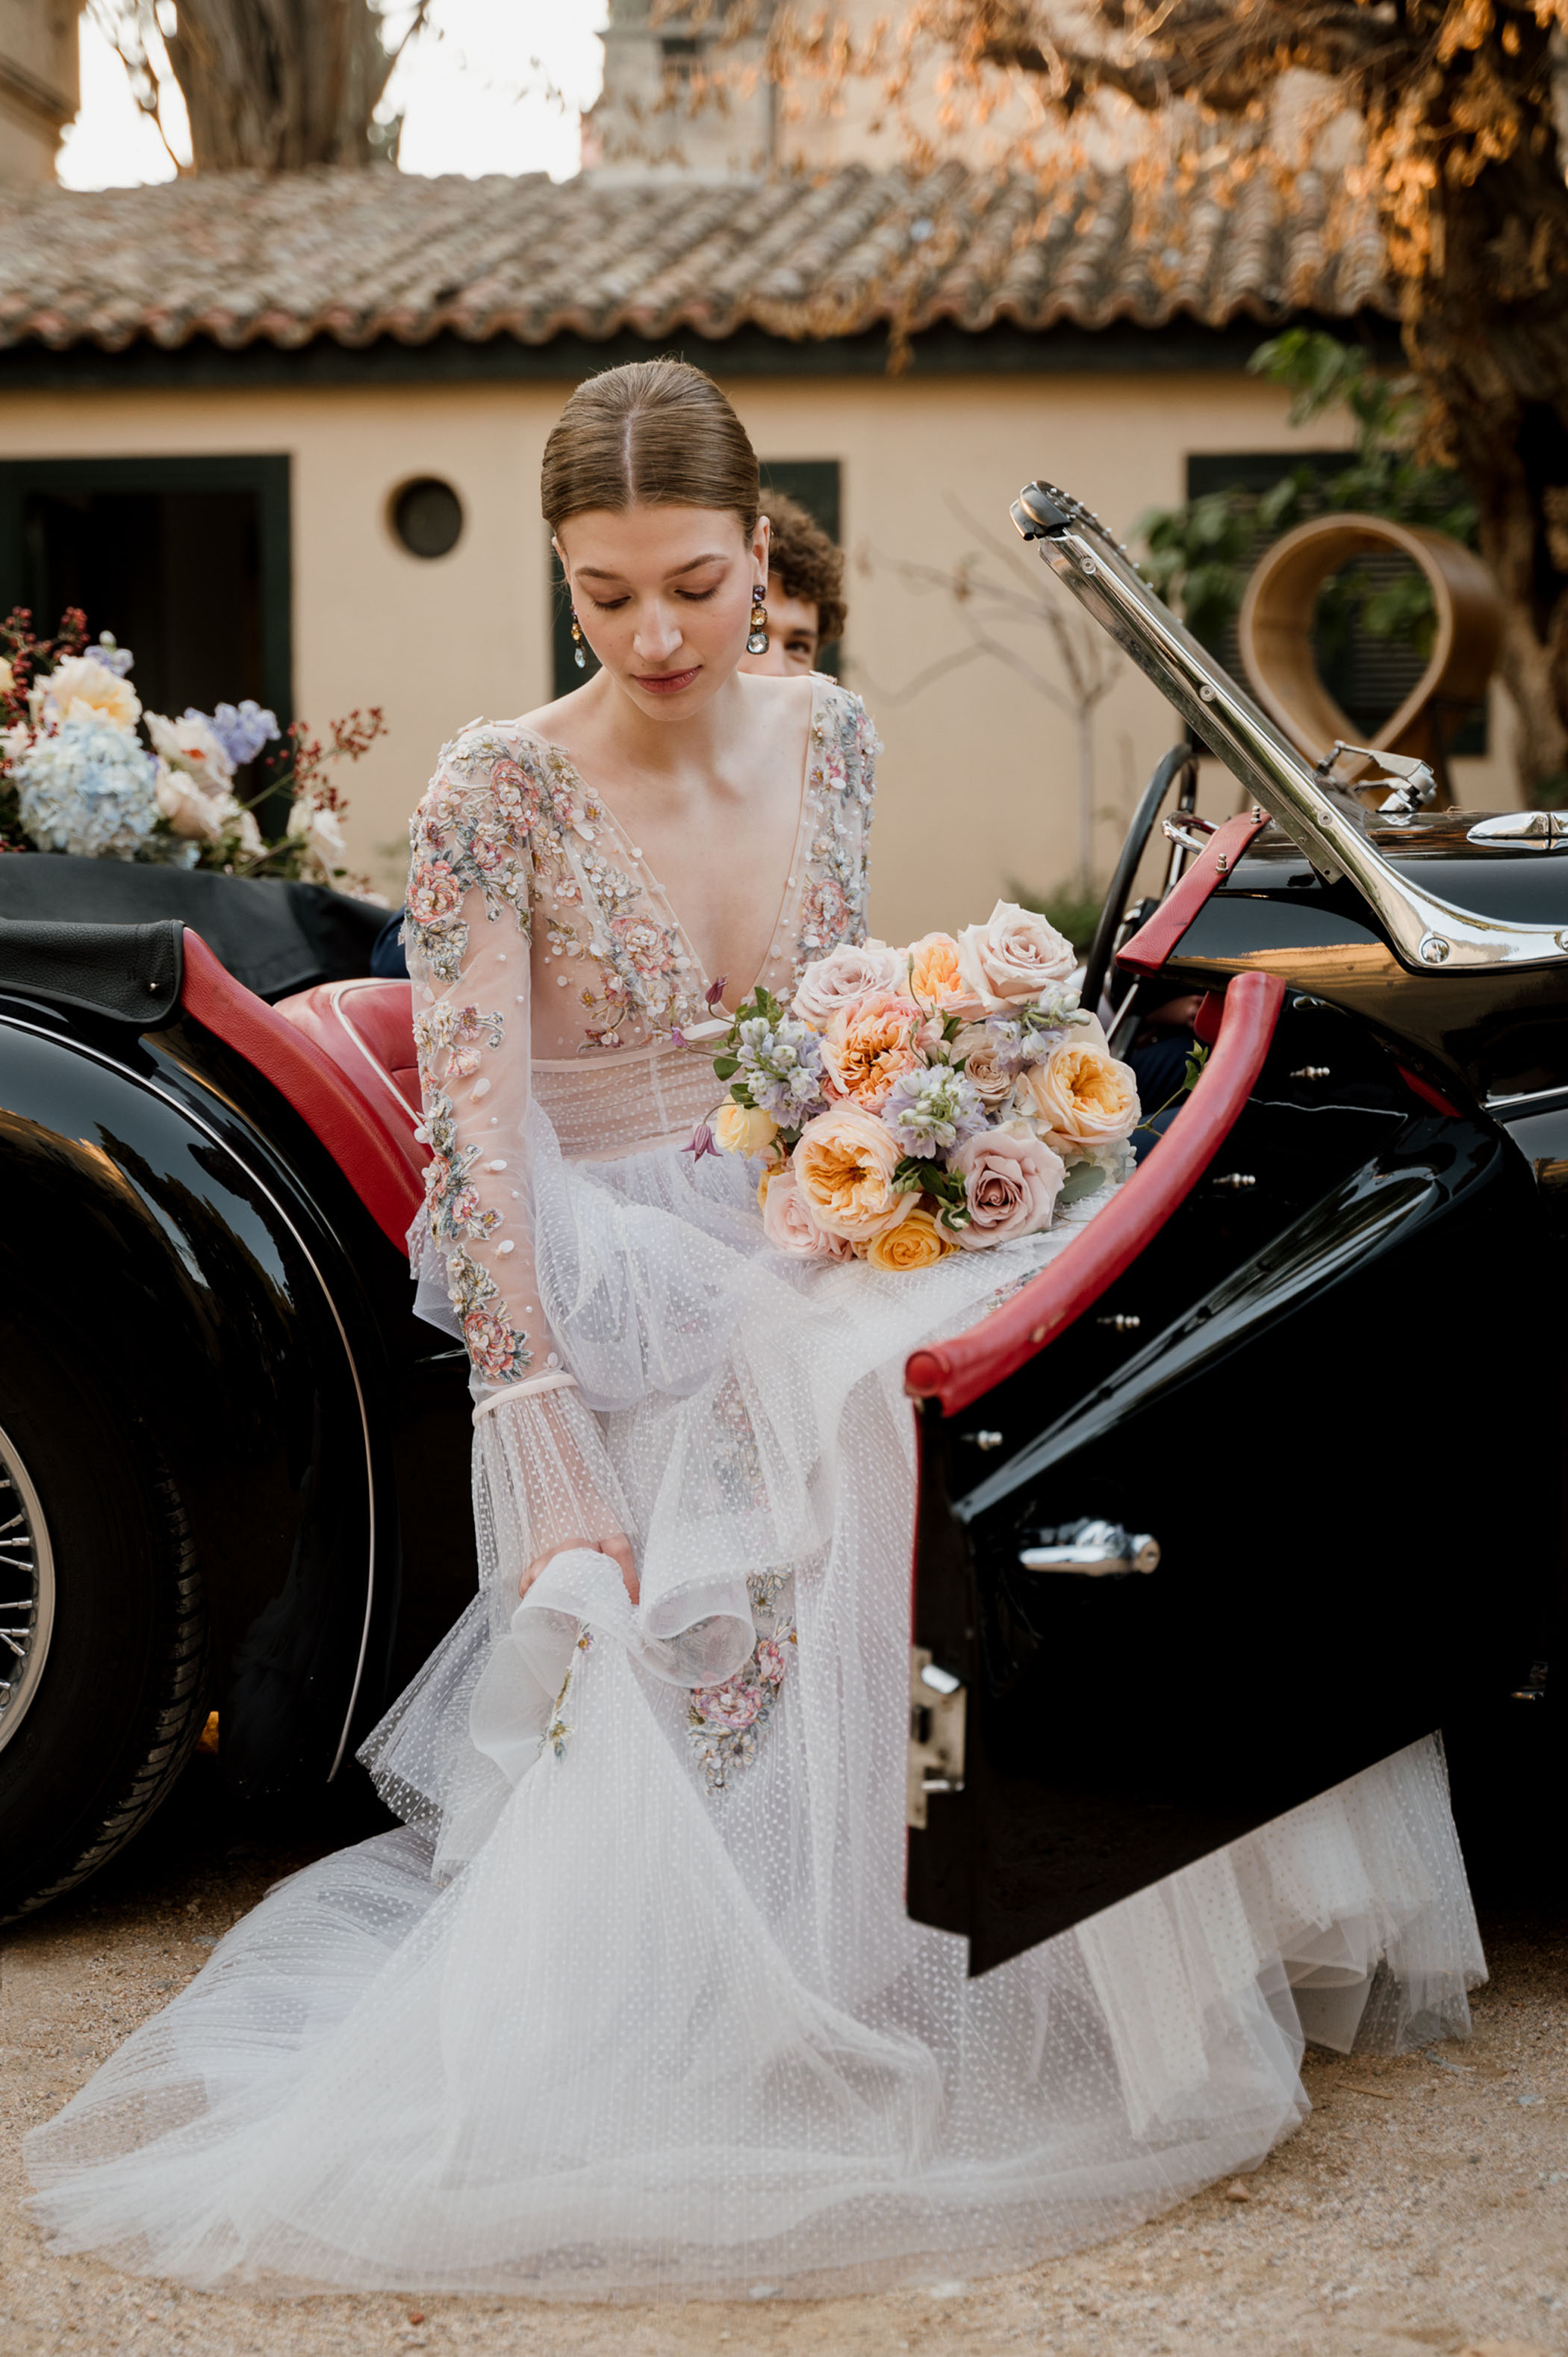 Romantic vintage wedding vibes bloom at the Queen's Tower in Athens